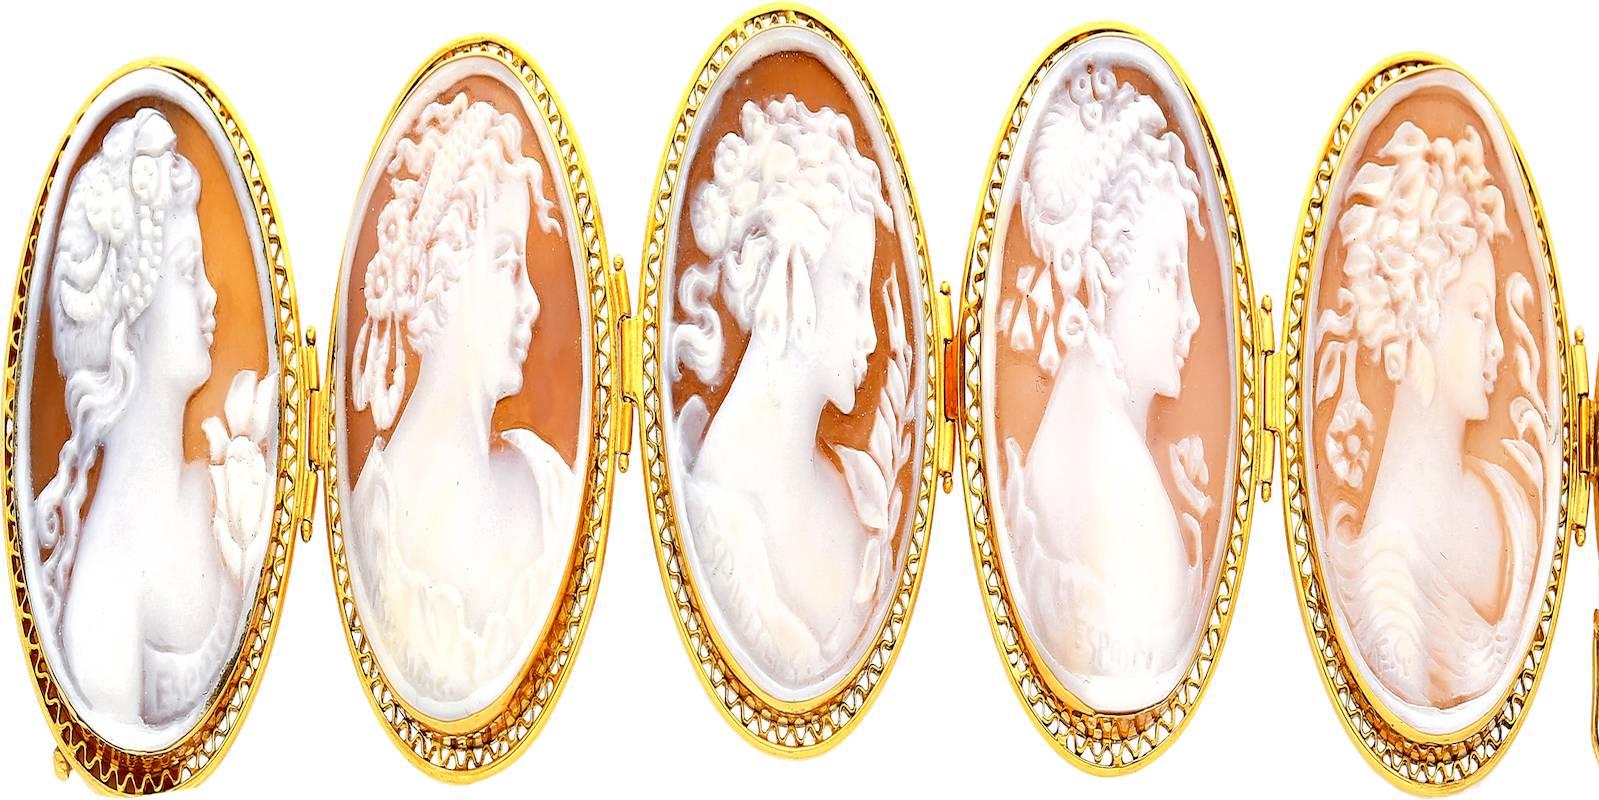 Carved from seashells, Cameo Shells have been a high jewelry staple for nearly 1,000 years. The tradition began in the fifteenth or sixteenth century and was popularized by Queen Victoria of England in 1837-1901.

This bracelet has aged incredibly